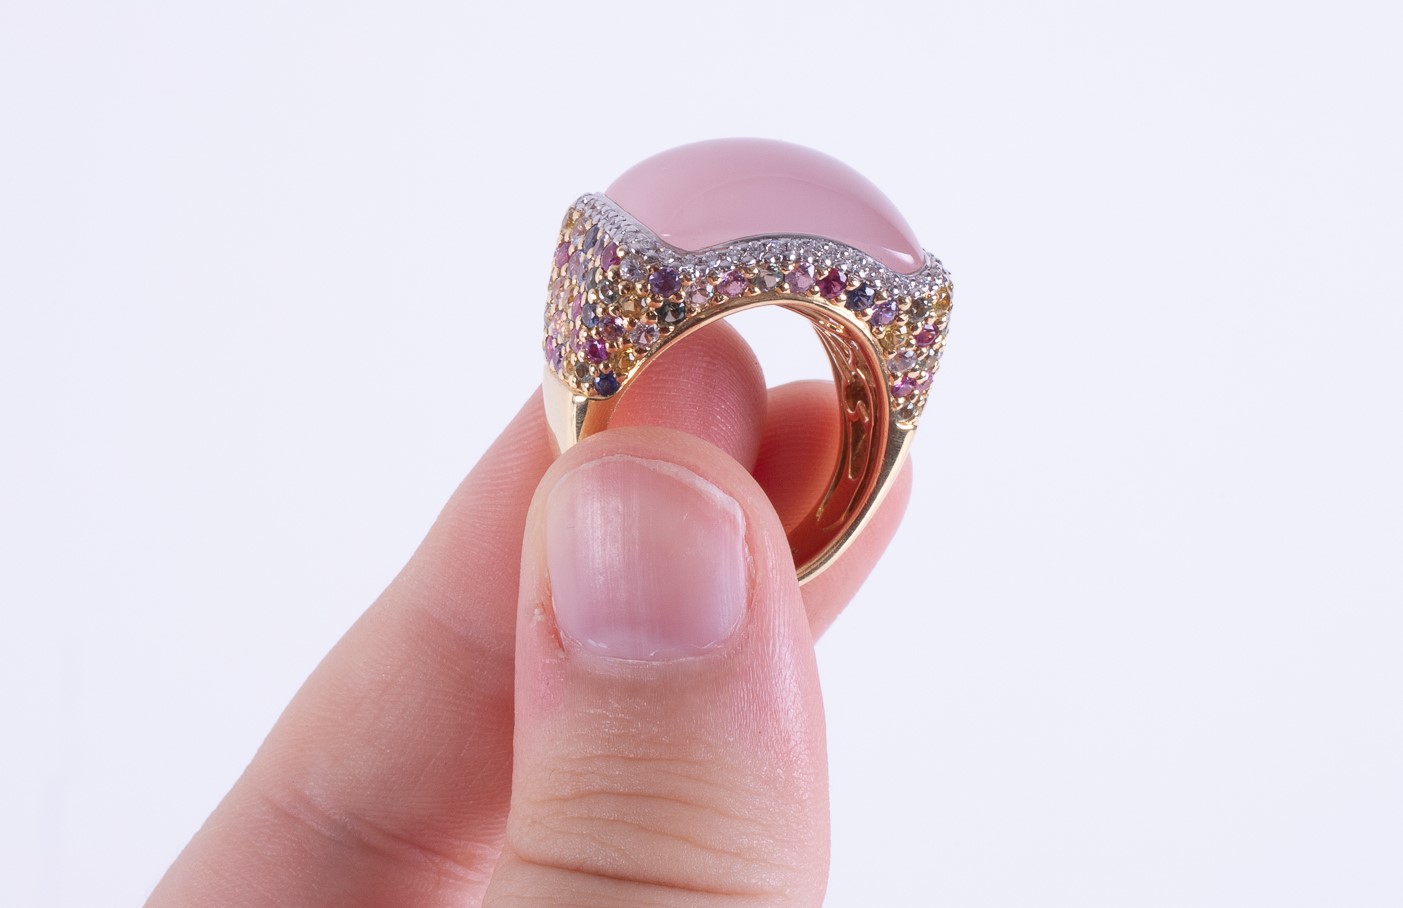 An impressive & ornate 18ct yellow gold ring set with a central arched rectangular cabochon cut rose